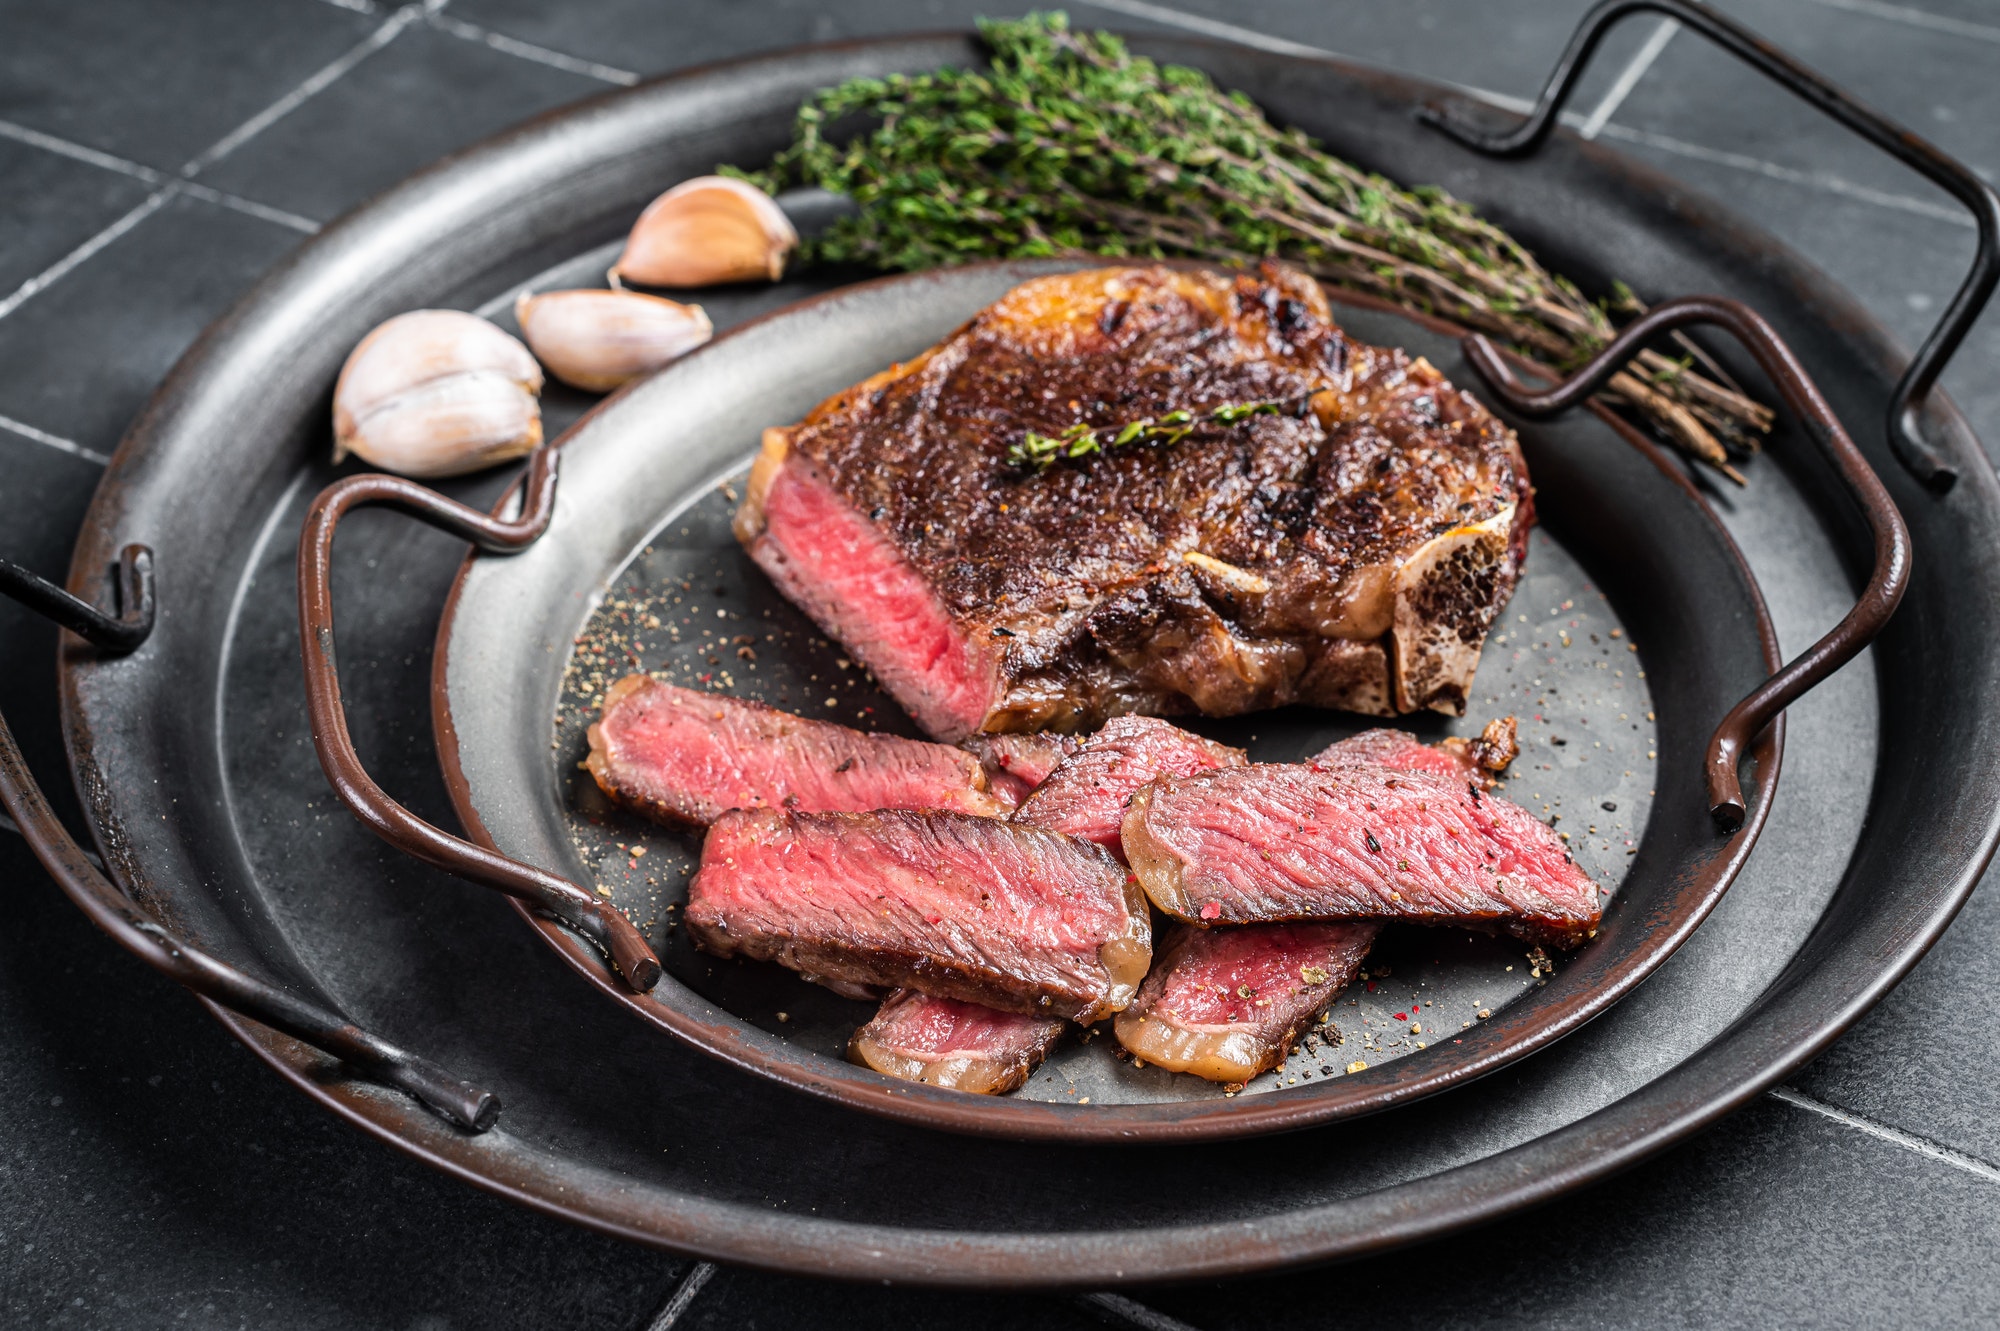 Roasted Sliced Wagyu New York beef meat steak or Striploin steak in a steel tray with herbs.